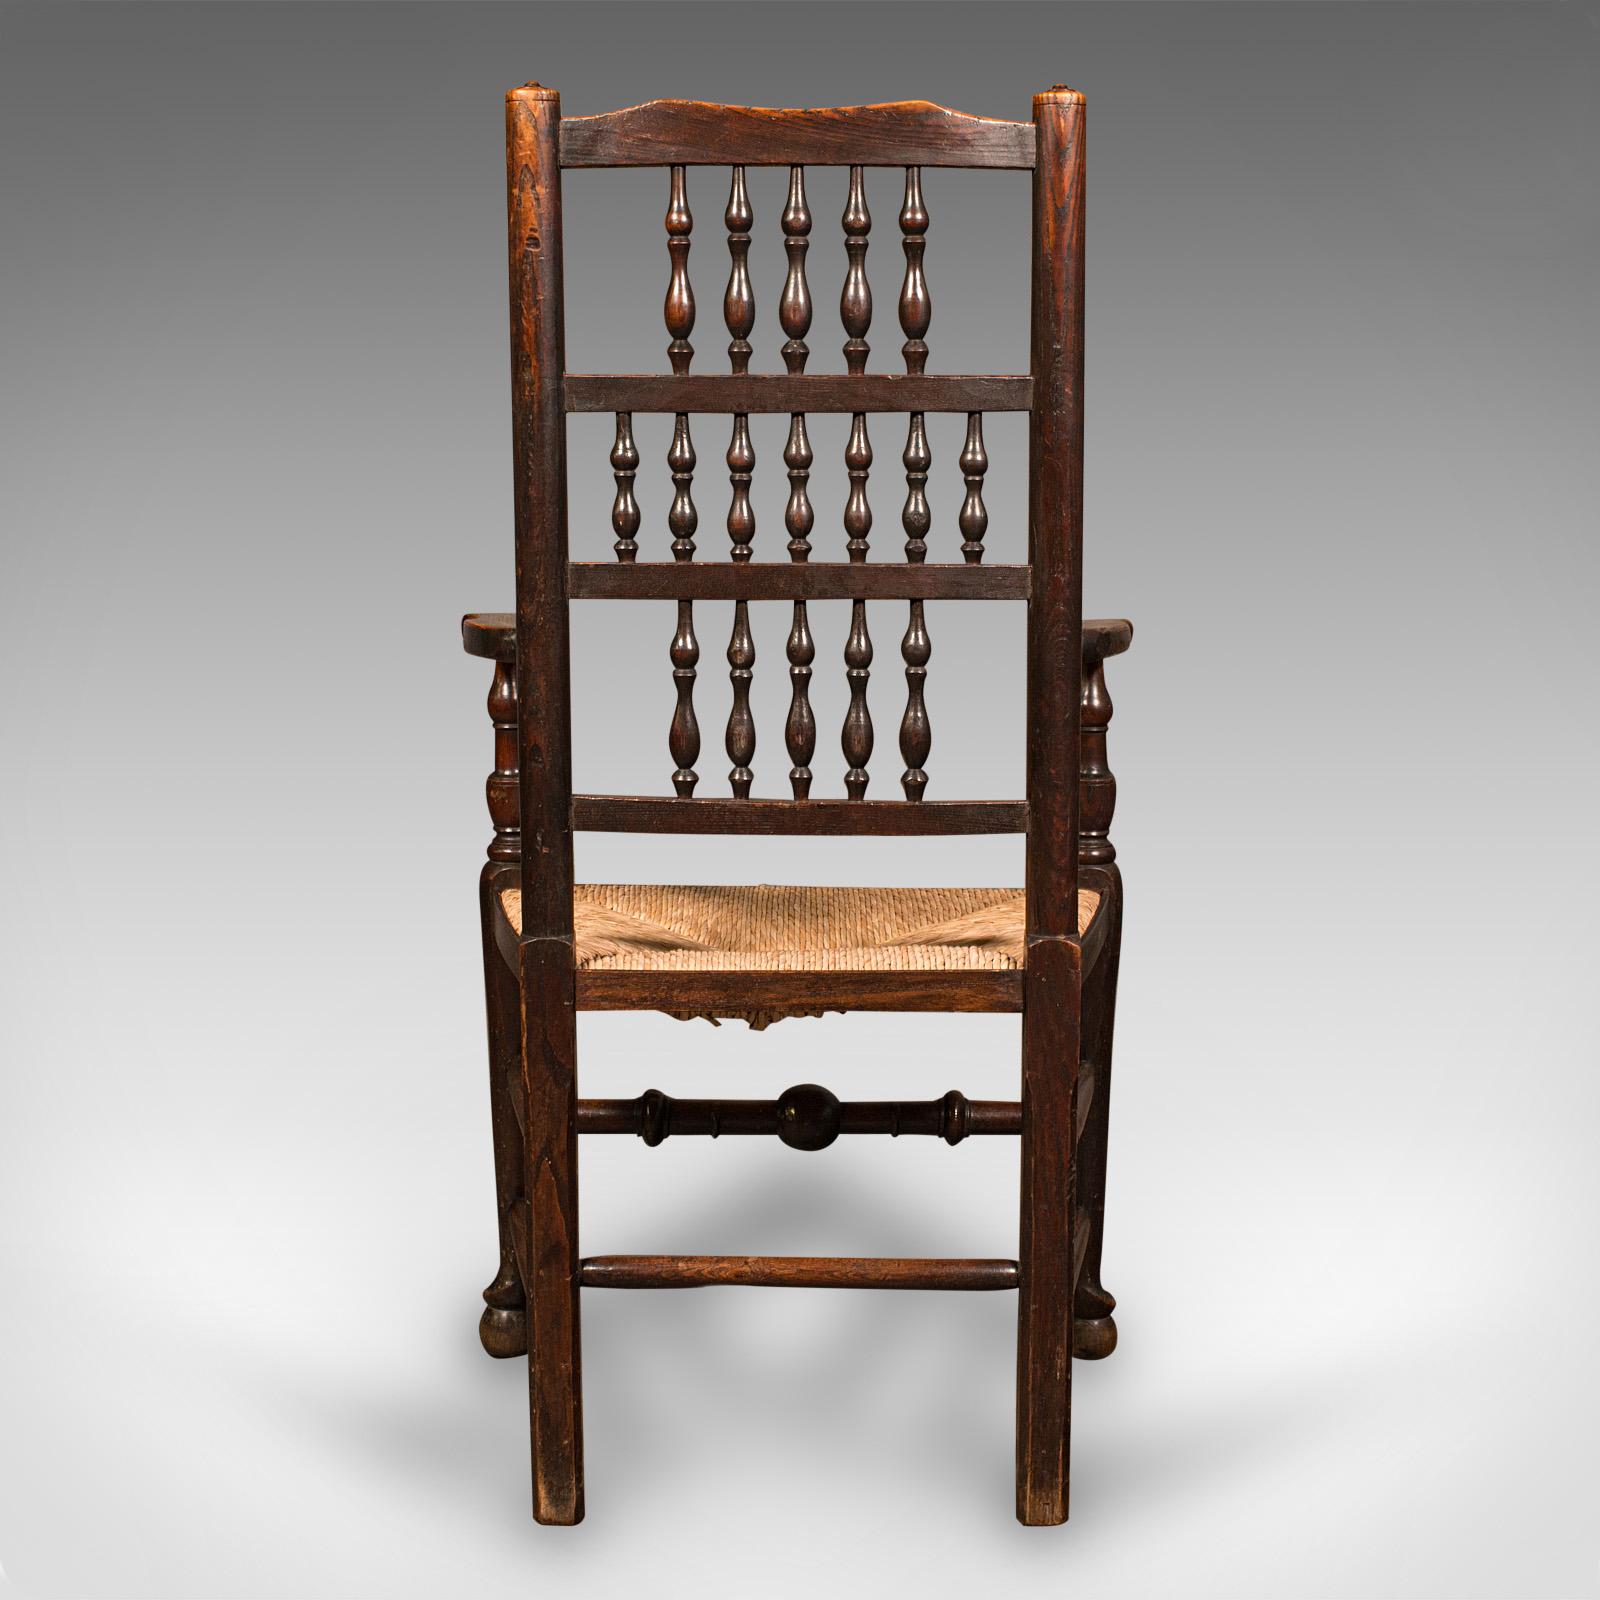 19th Century Antique Lancashire Spindle Back Elbow Chair, English Oak, Hall Carver, Victorian